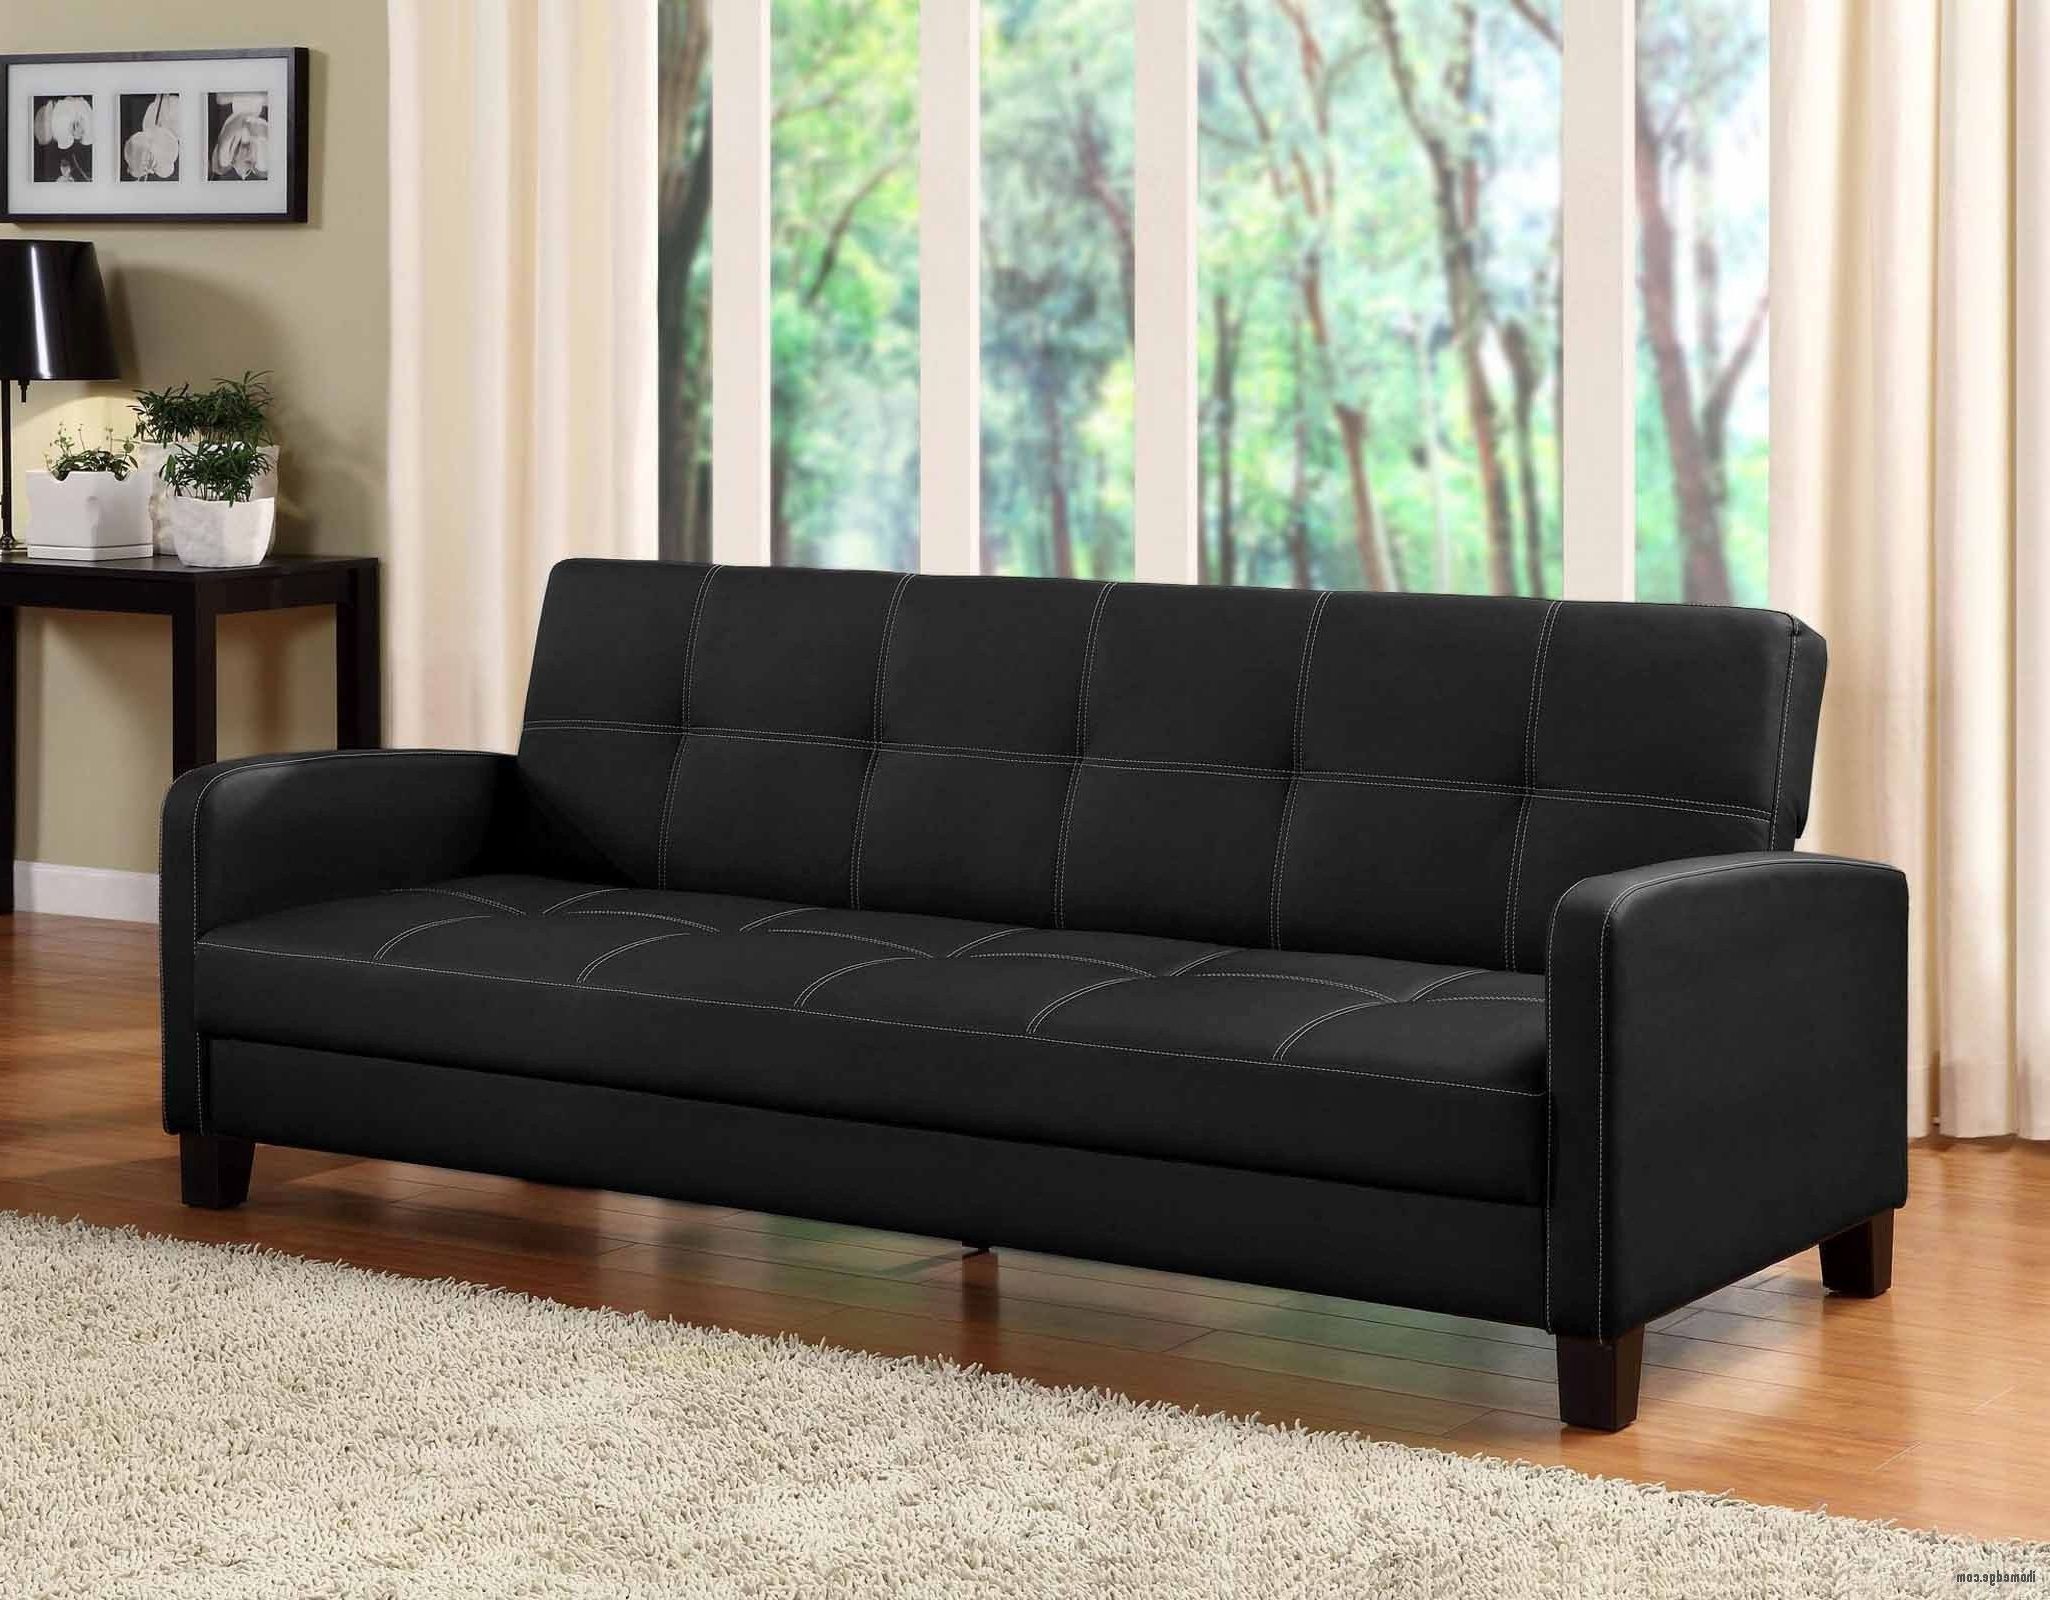 Most Popular Queen Size Convertible Sofa Bed – Ideas On Foter Inside Queen Size Convertible Sofa Beds (View 6 of 15)